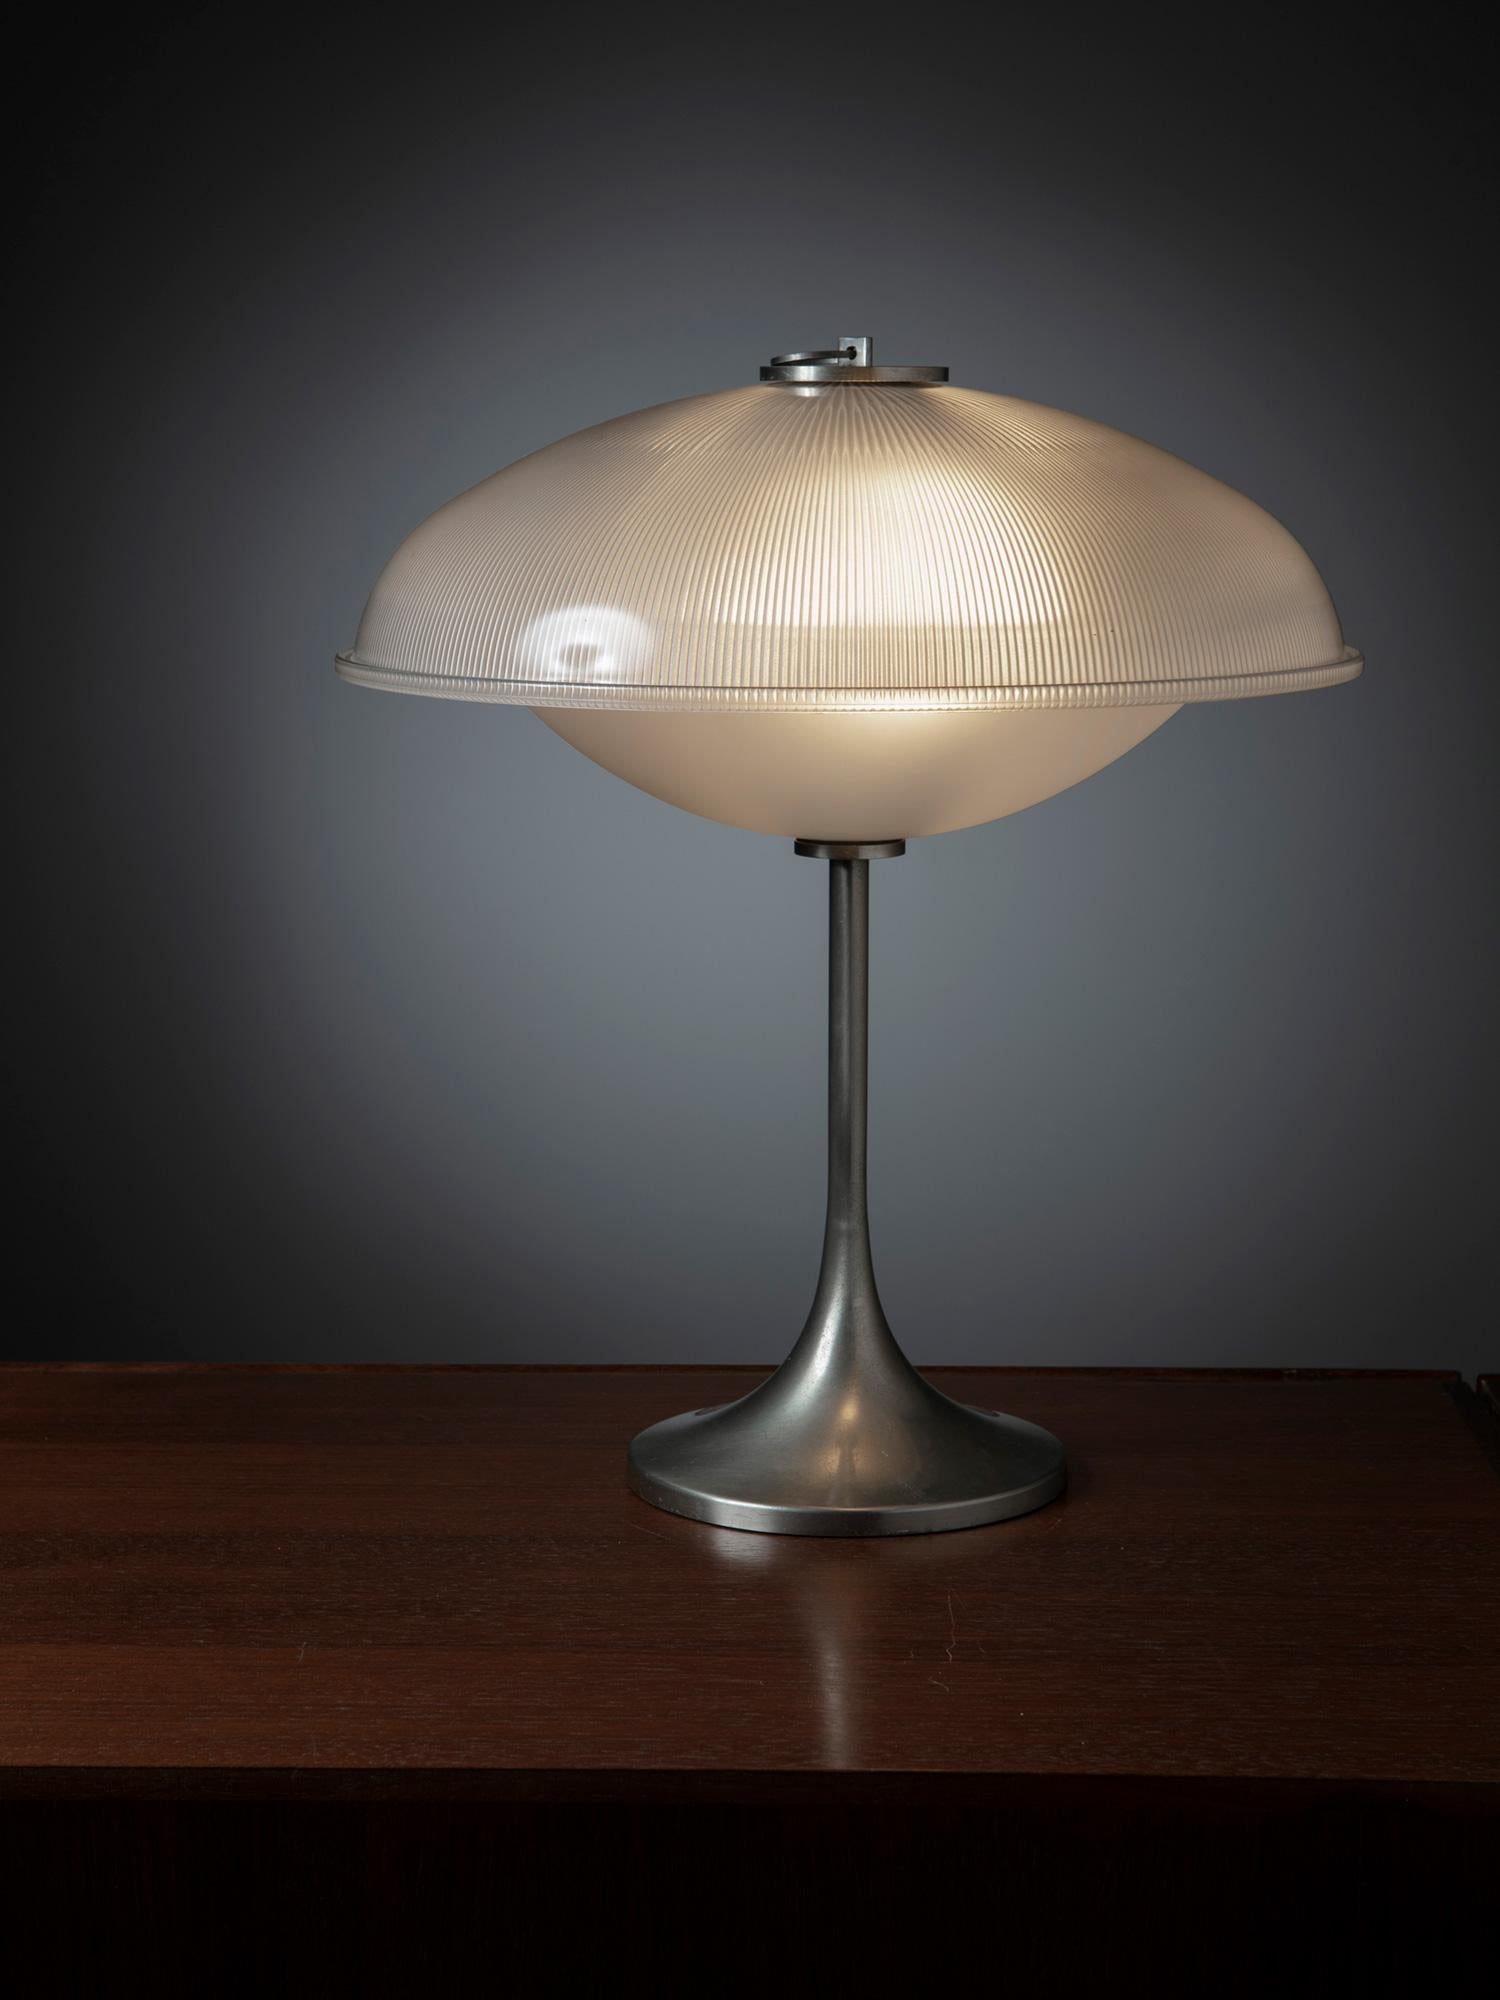 Rare table lamp with metal base and prismatic glass shades.
The lamp has visual connections with the model manufactured by Gregotti for Arredoluce.